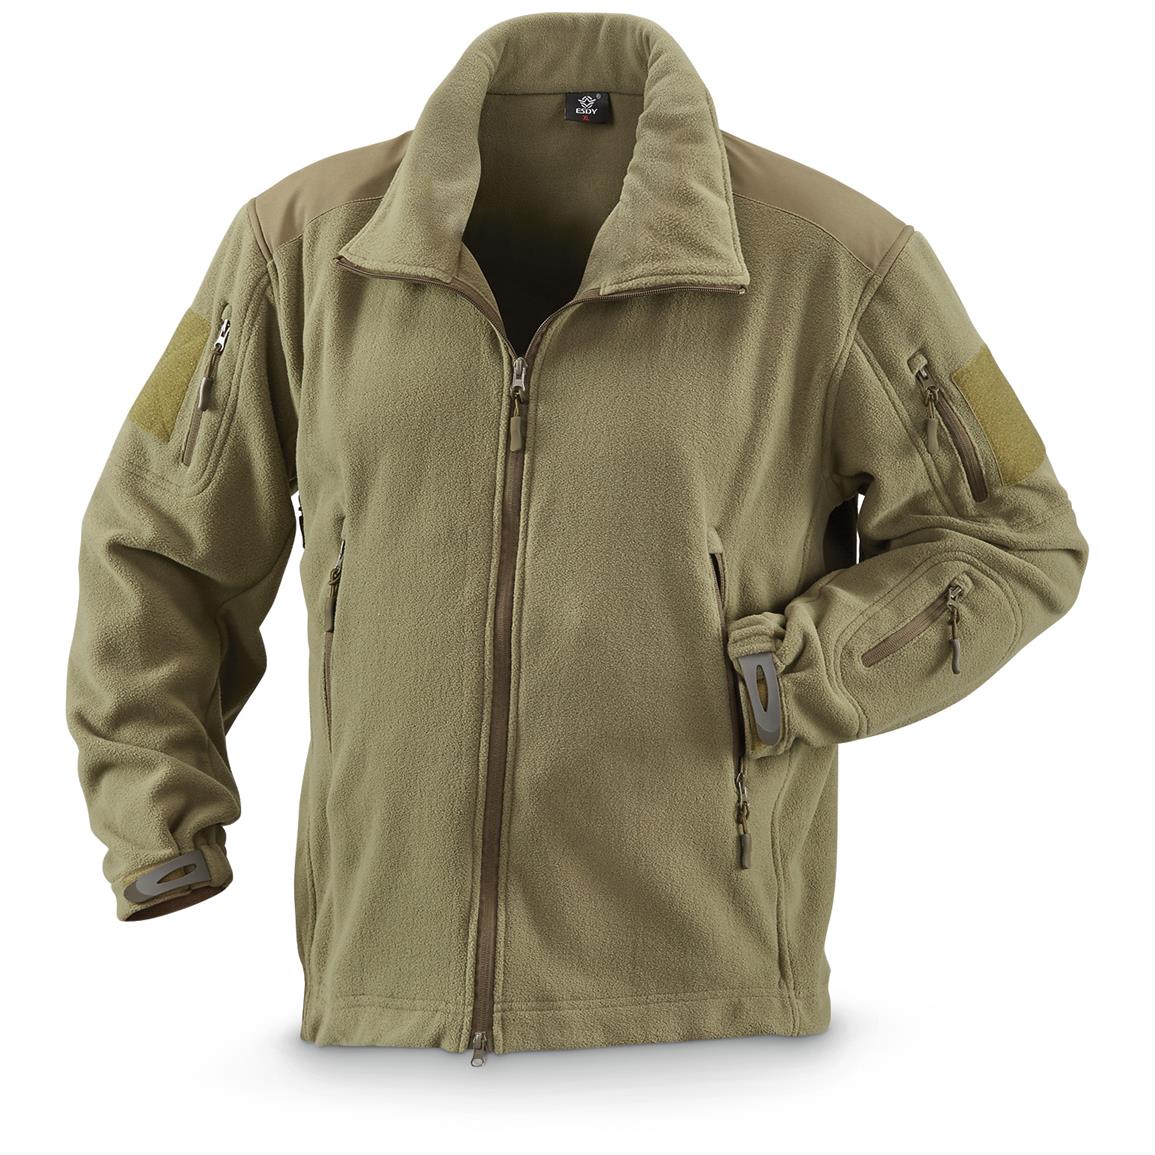 U.S. Spec Heavyweight Fleece Jacket 641090, Tactical Clothing at Sportsman's Guide